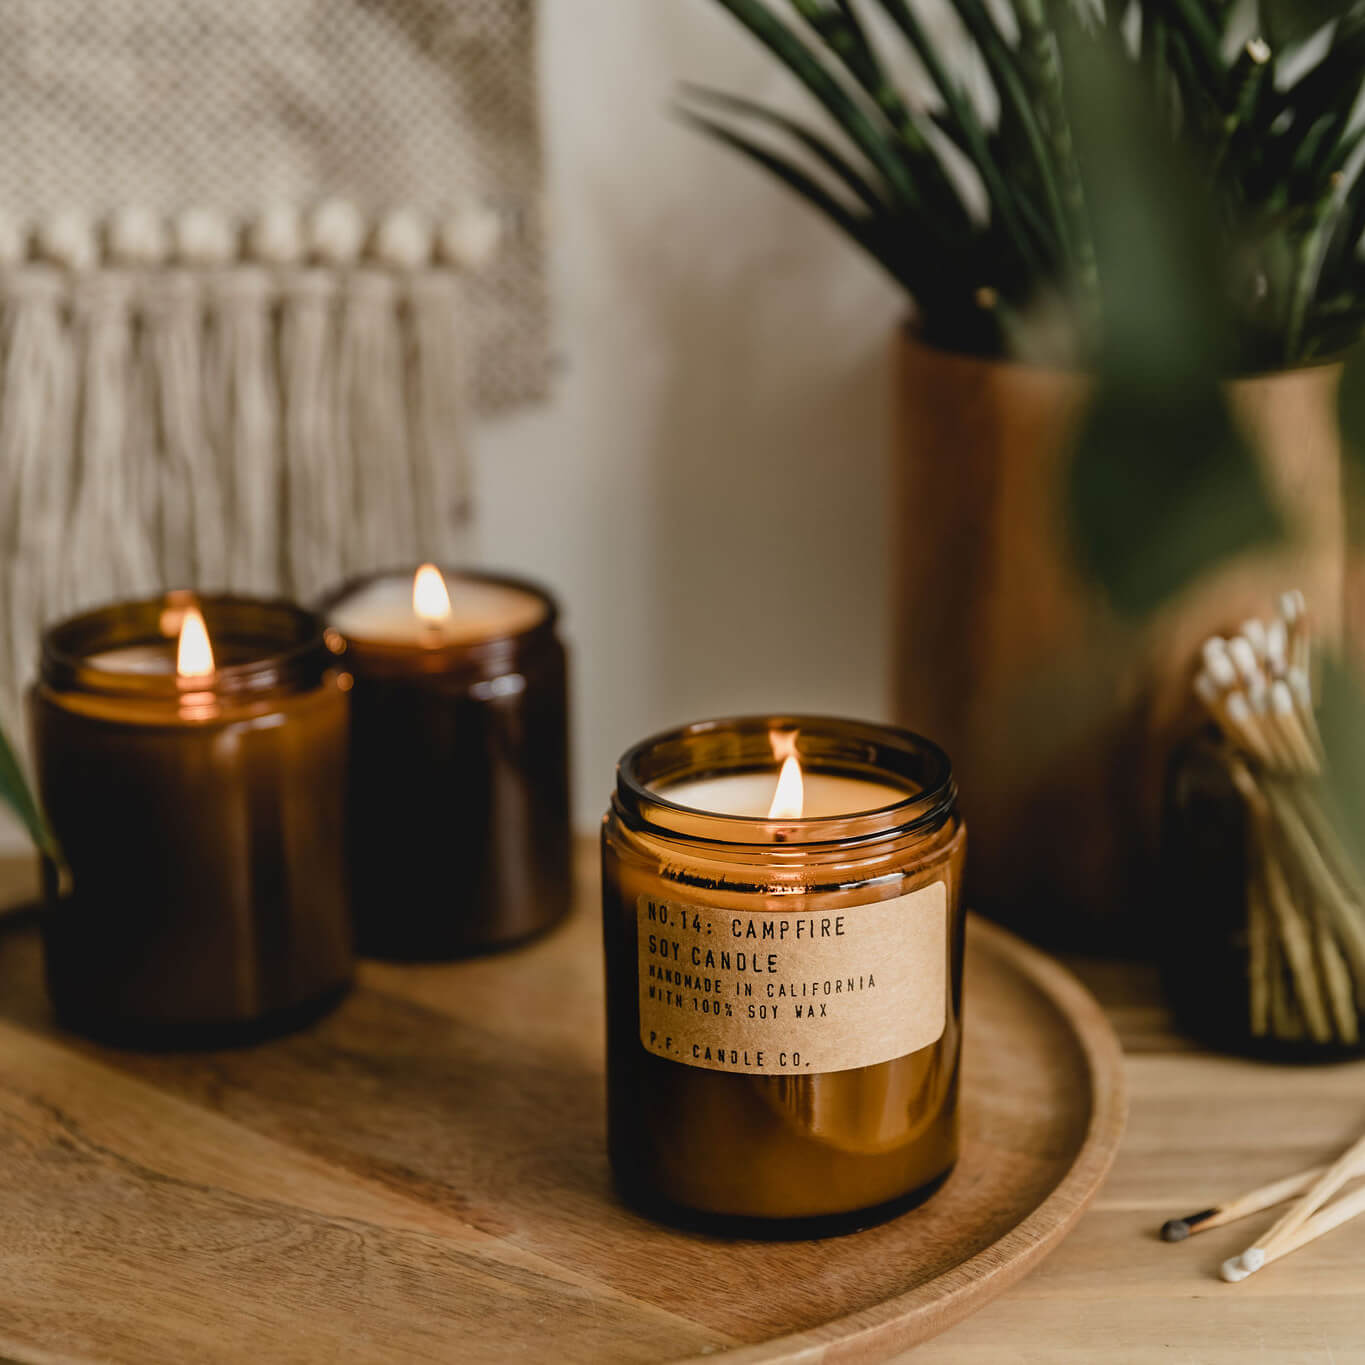 No.14 Campfire Scented Candle by P.F. Candle Co.